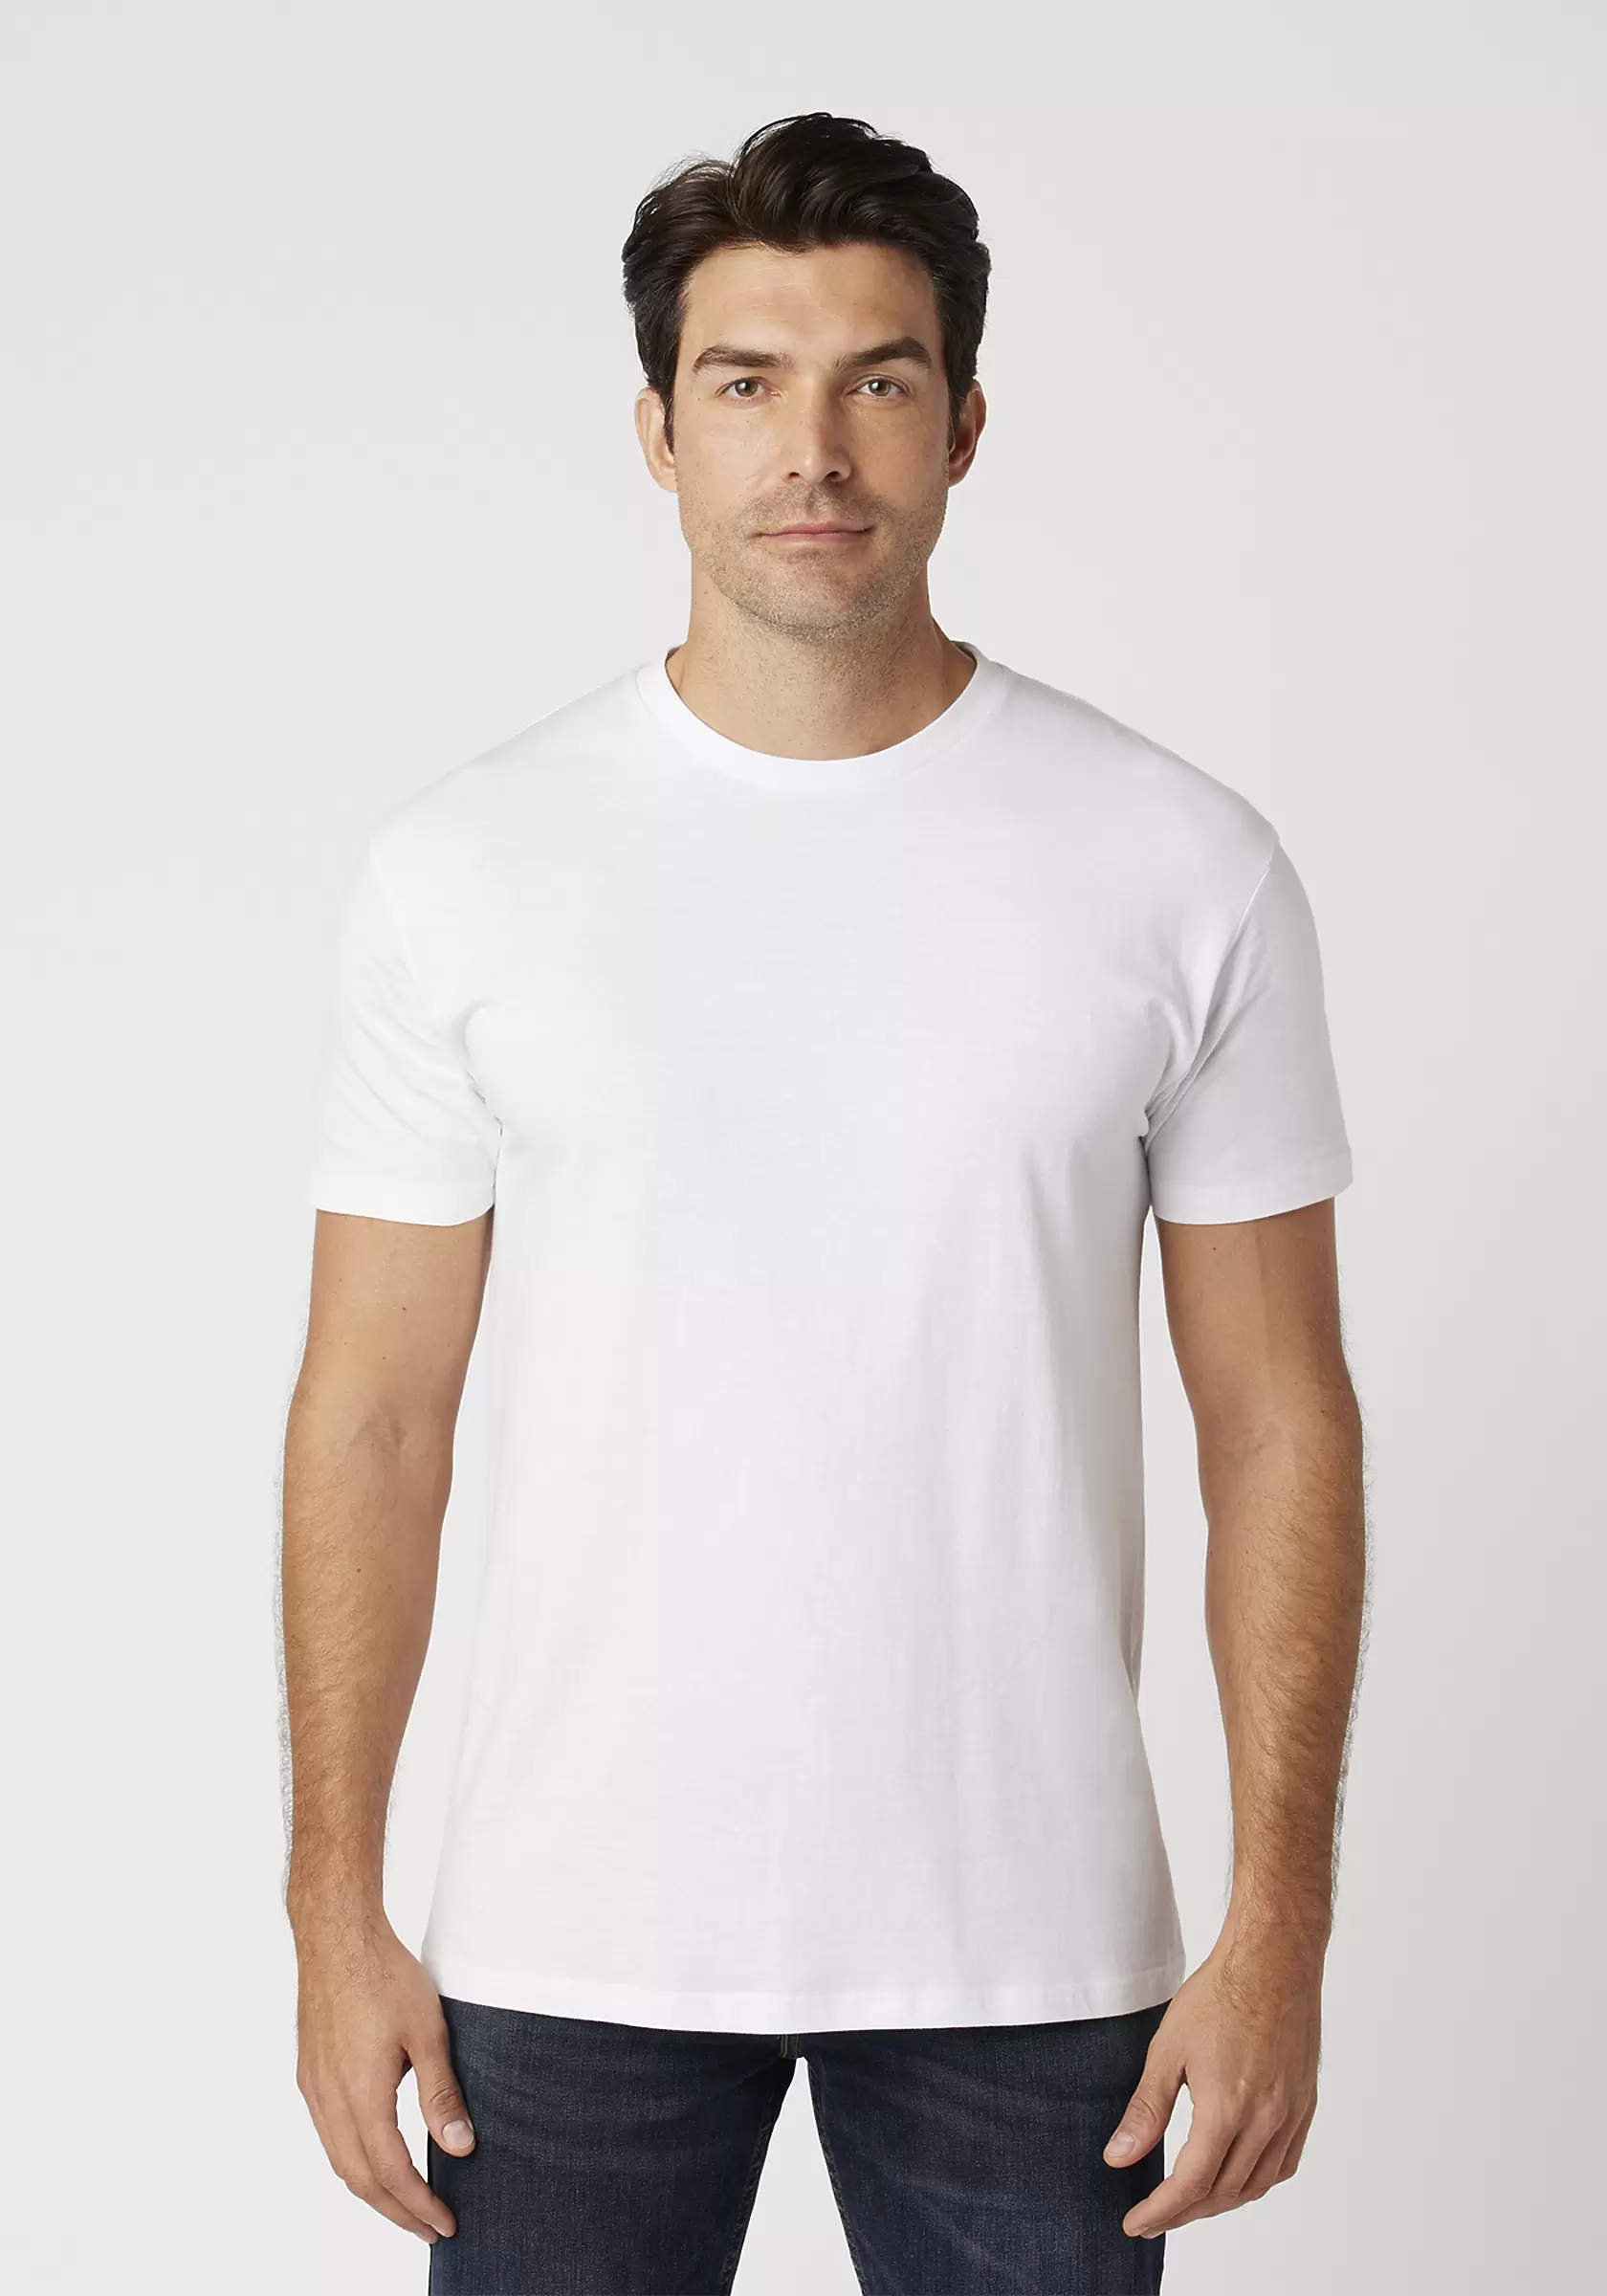 M1045 Crew Neck Men's Jersey T-Shirt - From $3.96